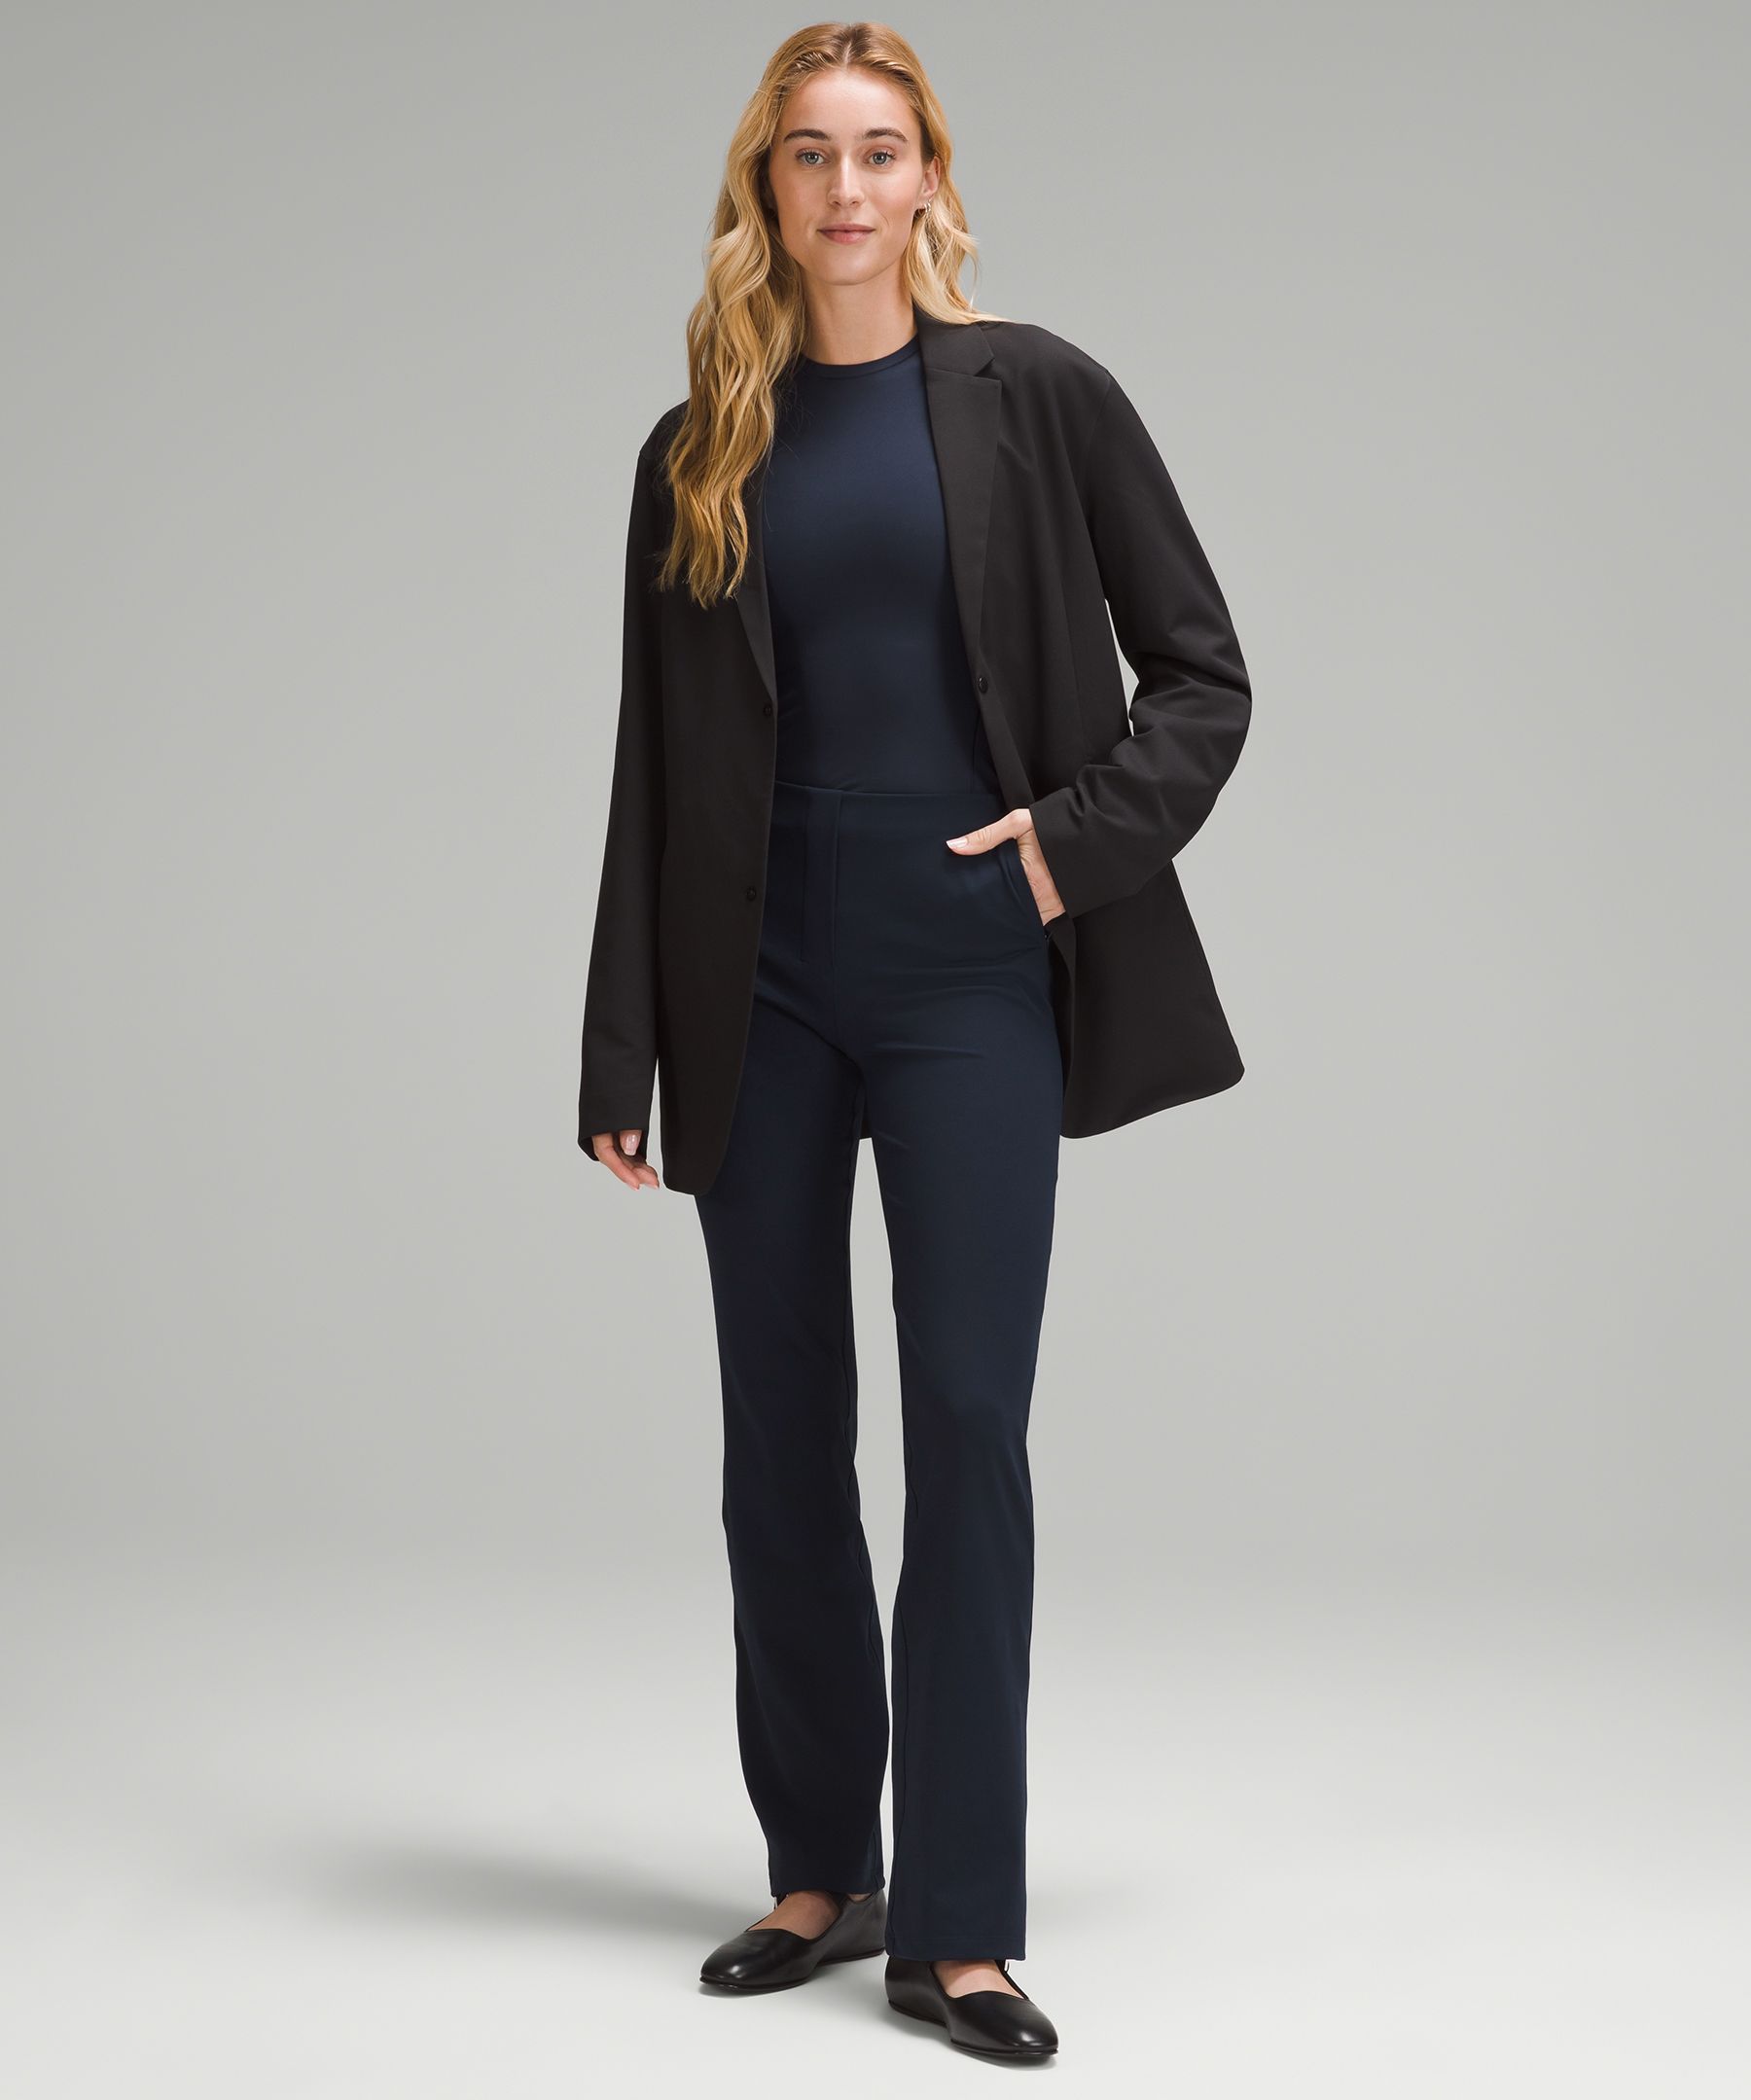 Smooth Fit Pull-On High-Rise Pant | Women's Trousers | lululemon 